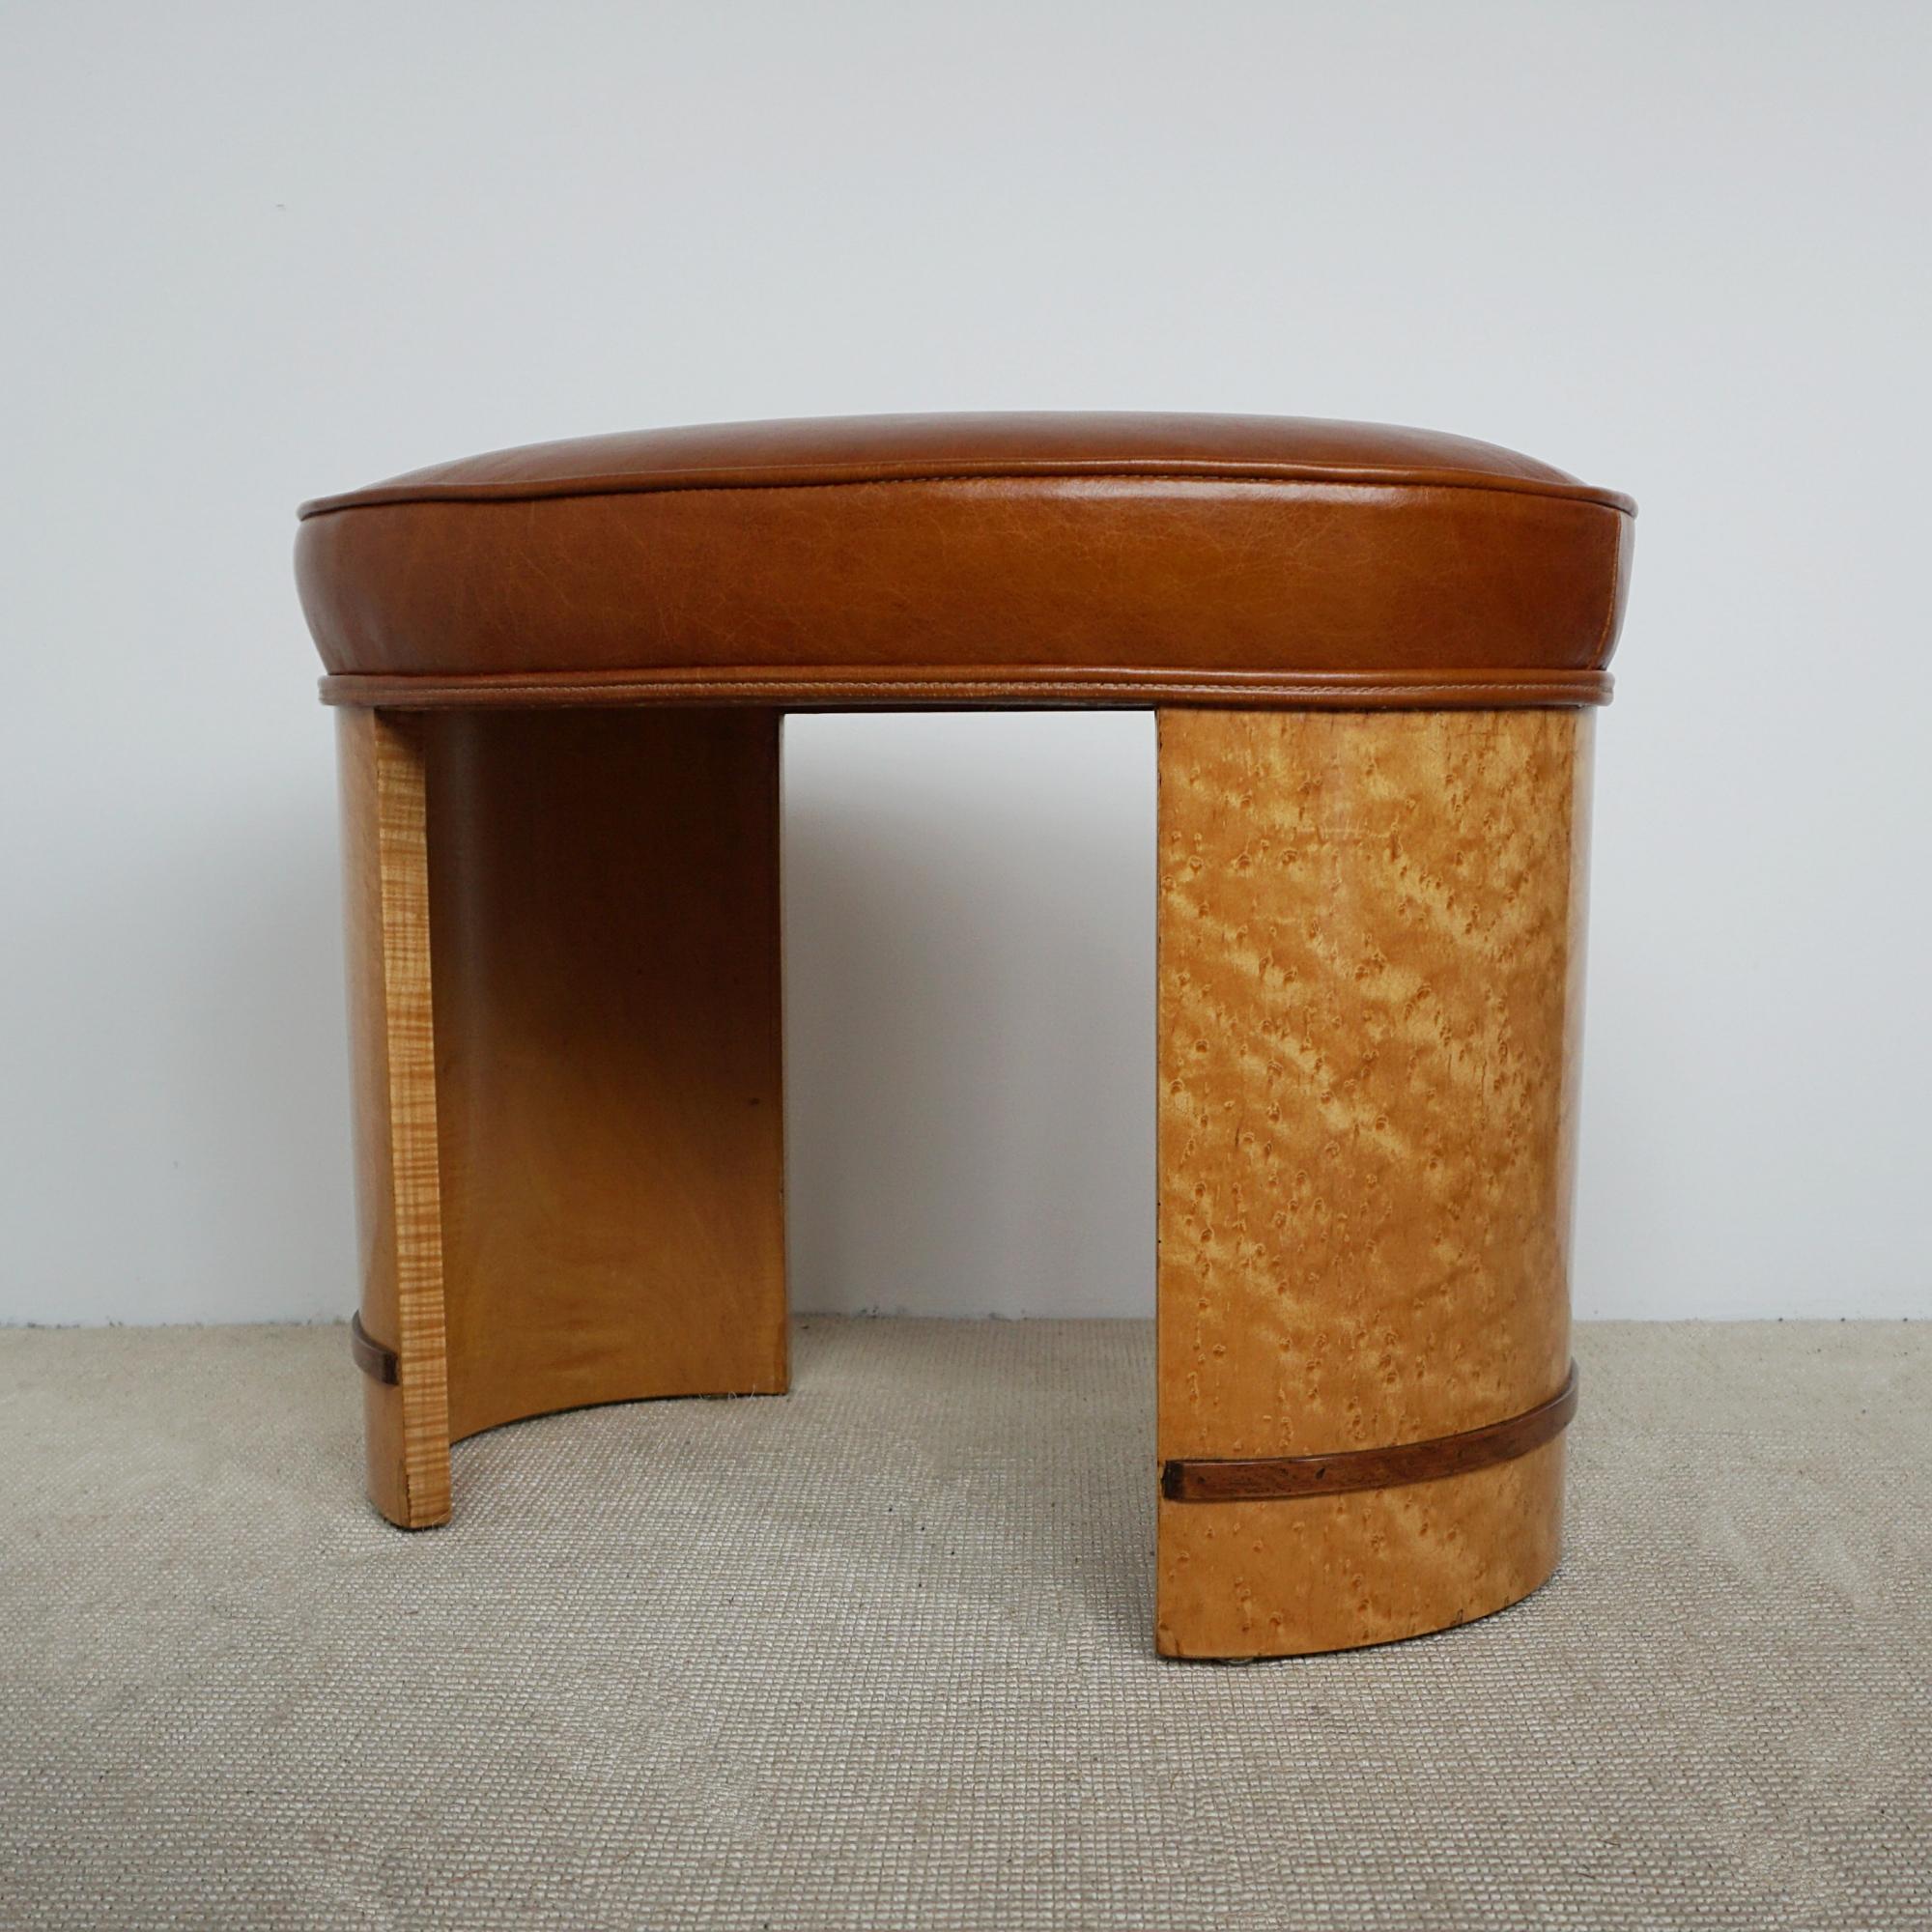 English Art Deco Birdseye Maple Veneered Stool With Brown Leather Re-upholstery For Sale